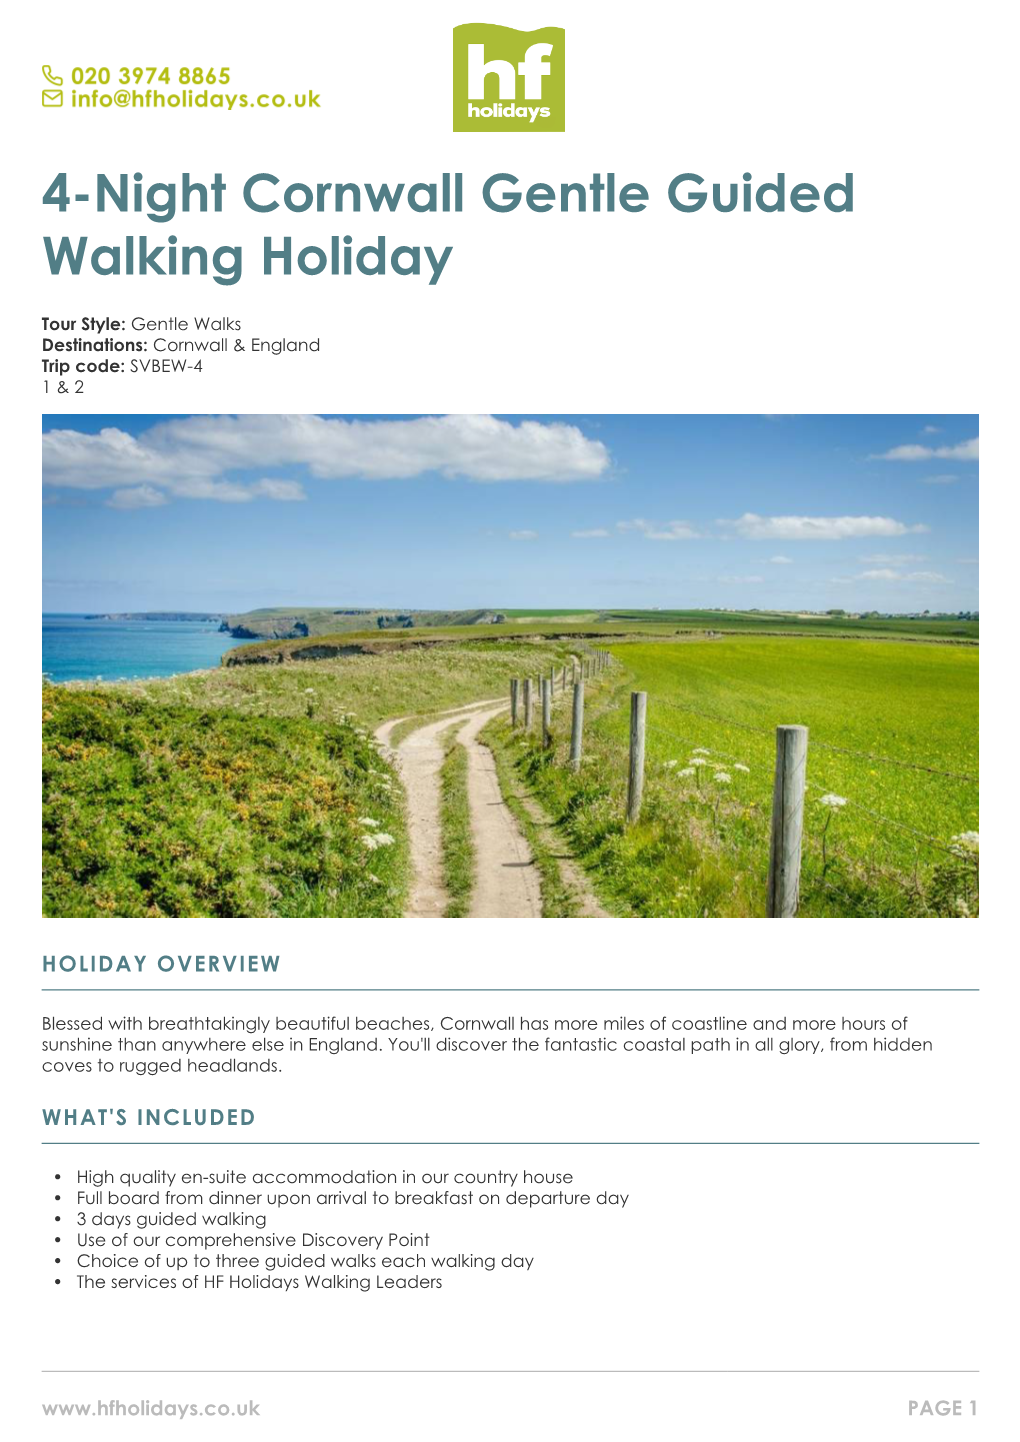 4-Night Cornwall Gentle Guided Walking Holiday